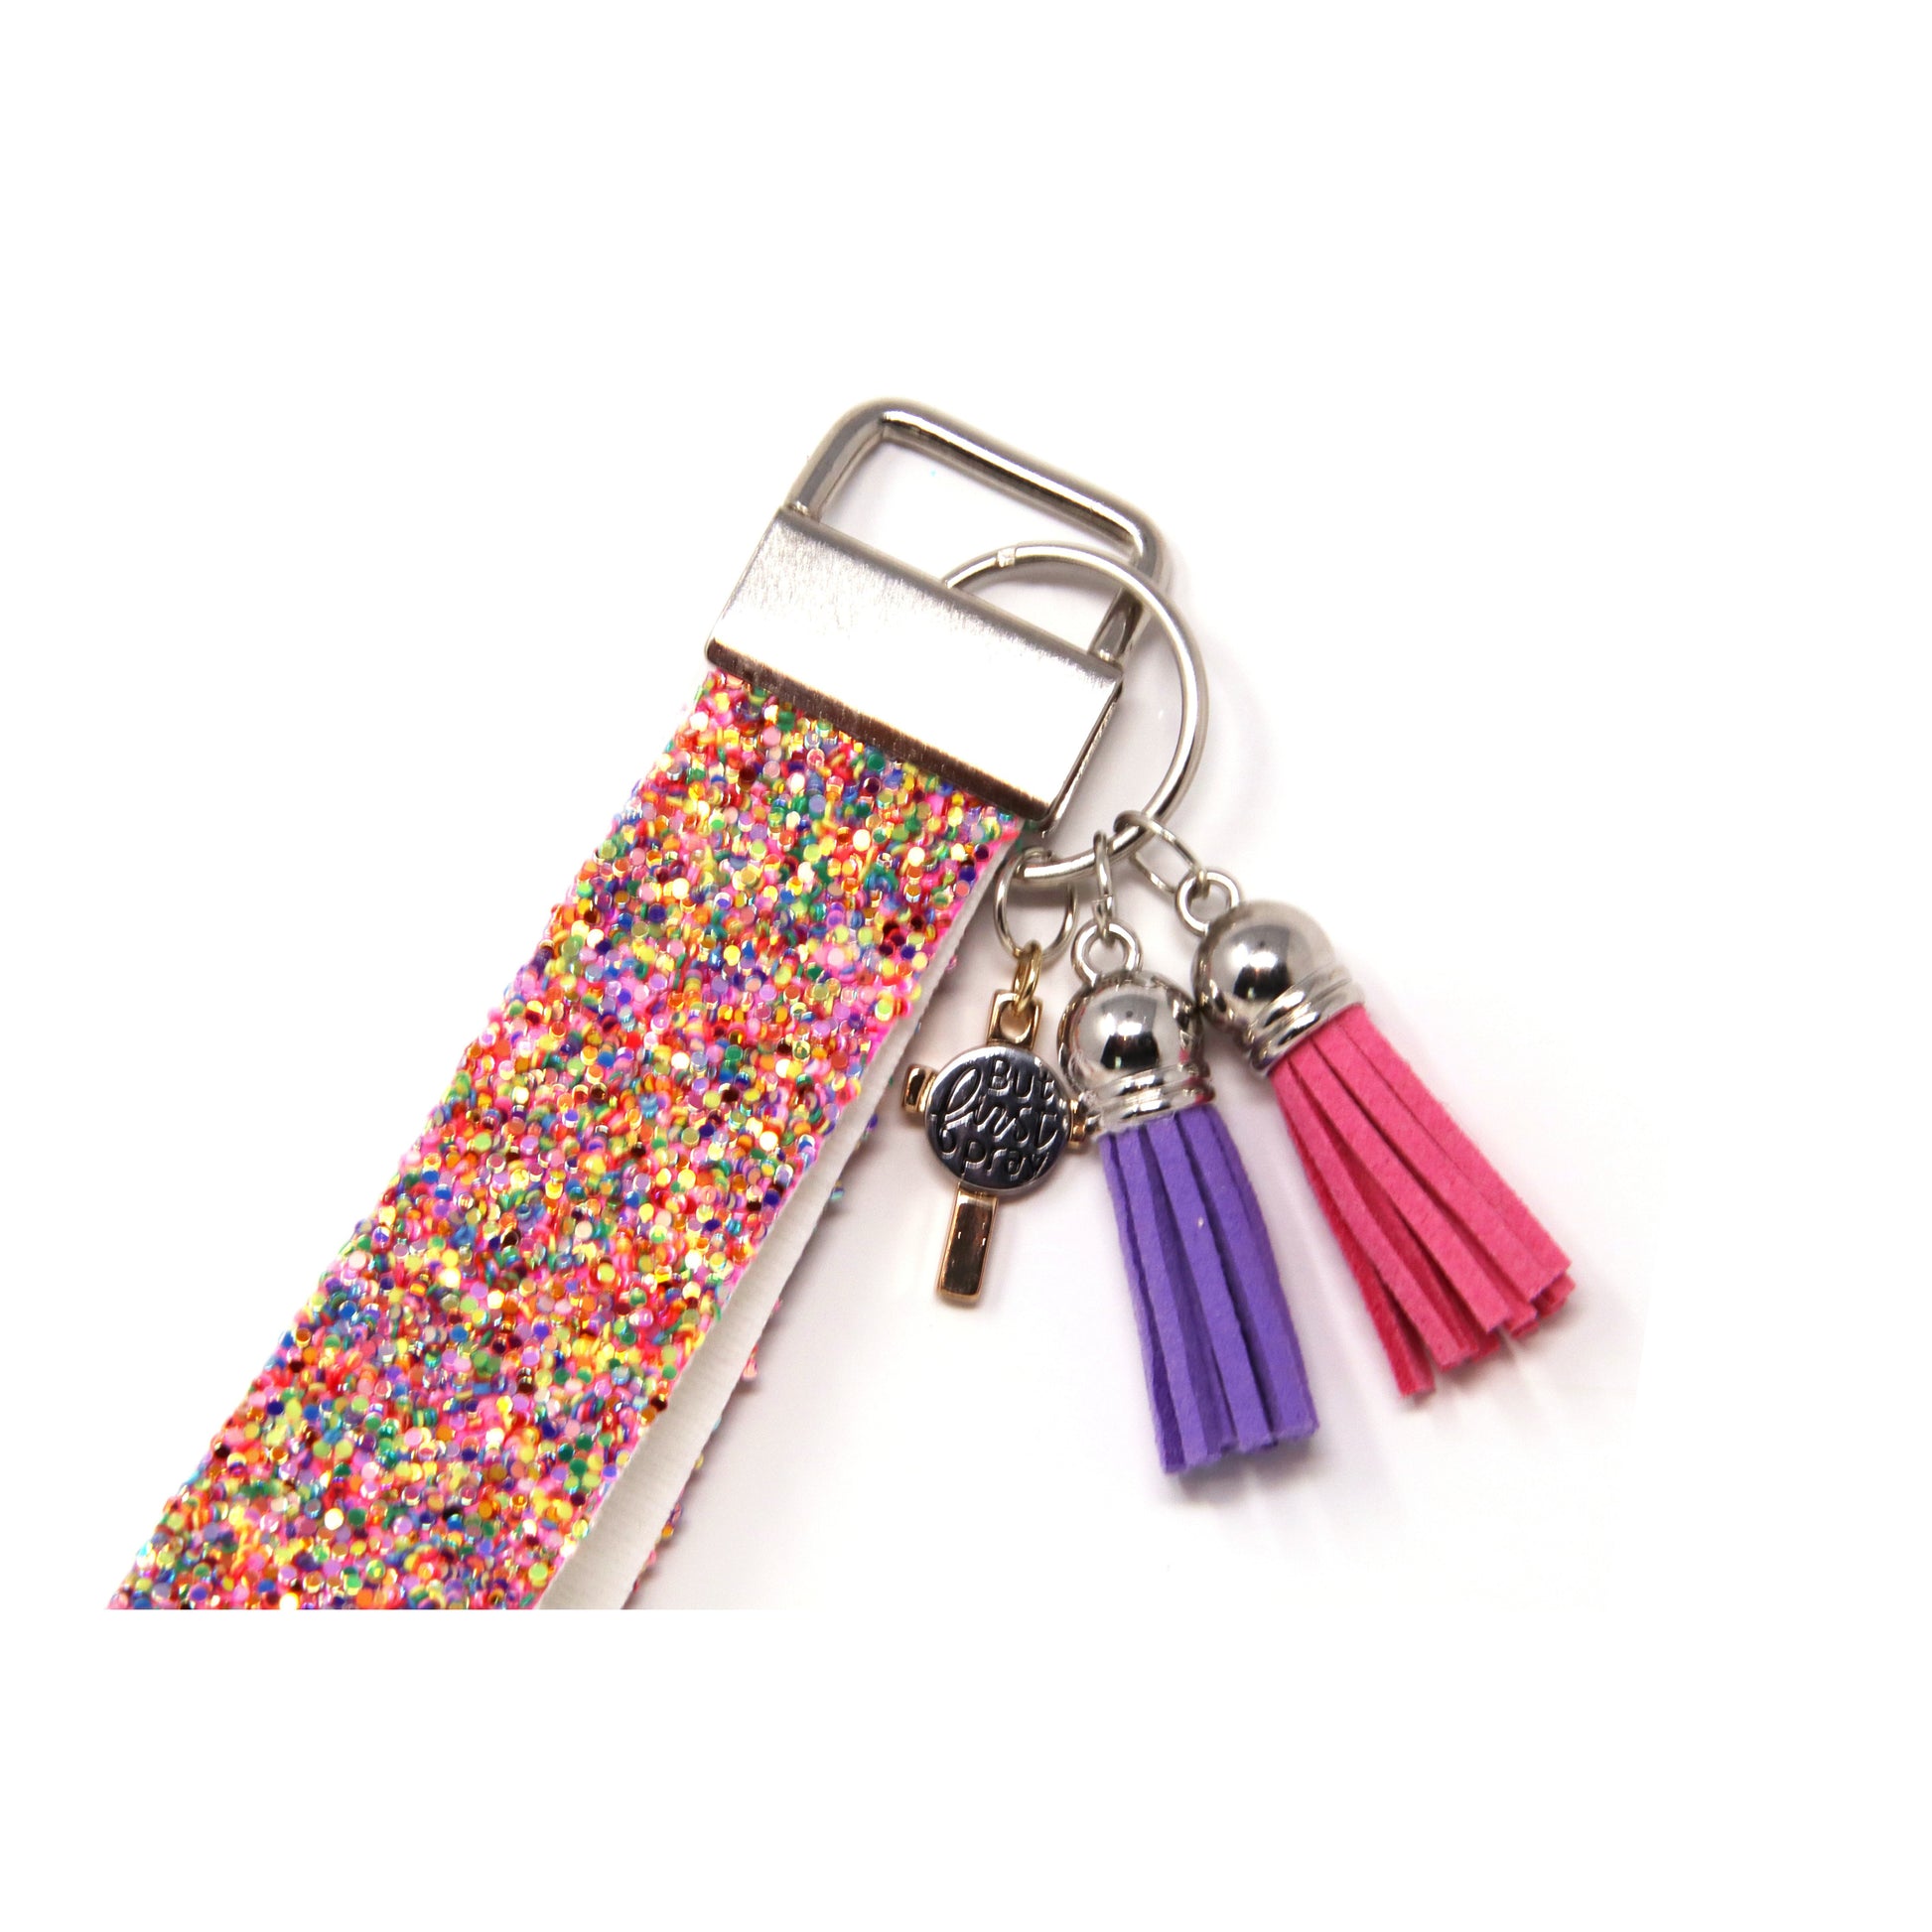 Key chain with tassels and charm